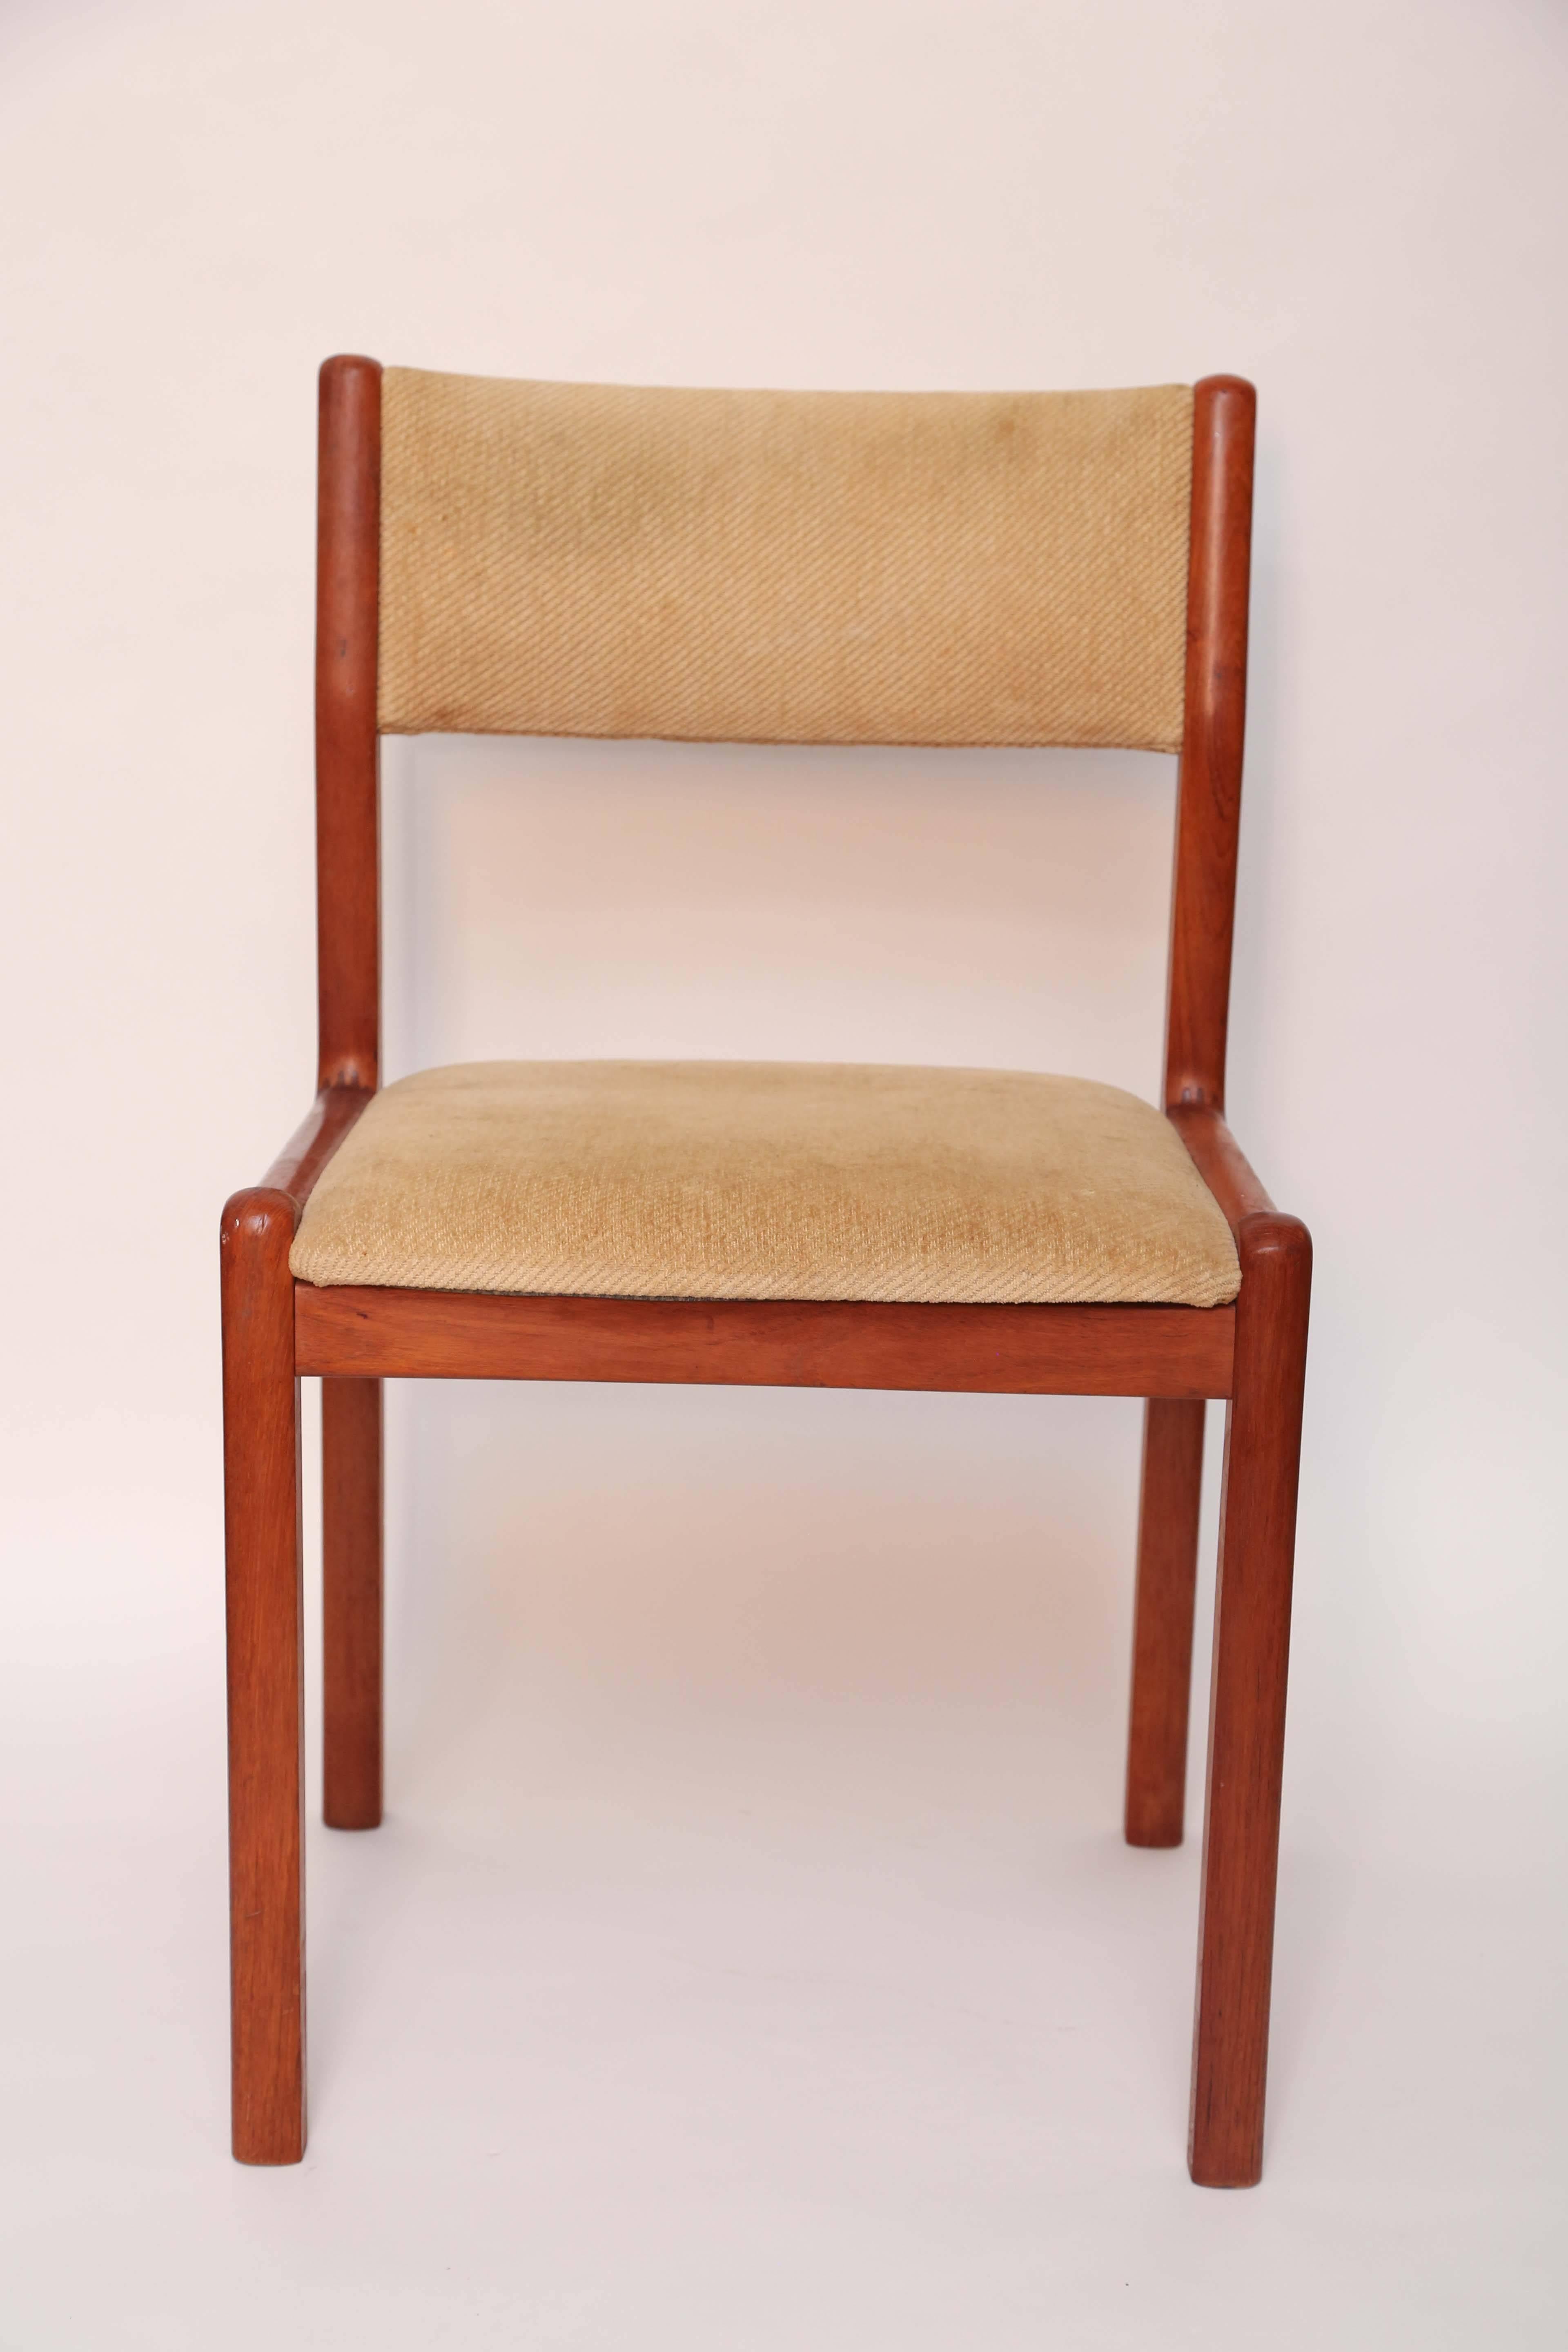 Original condition, as found, teak dining chairs by Moller.